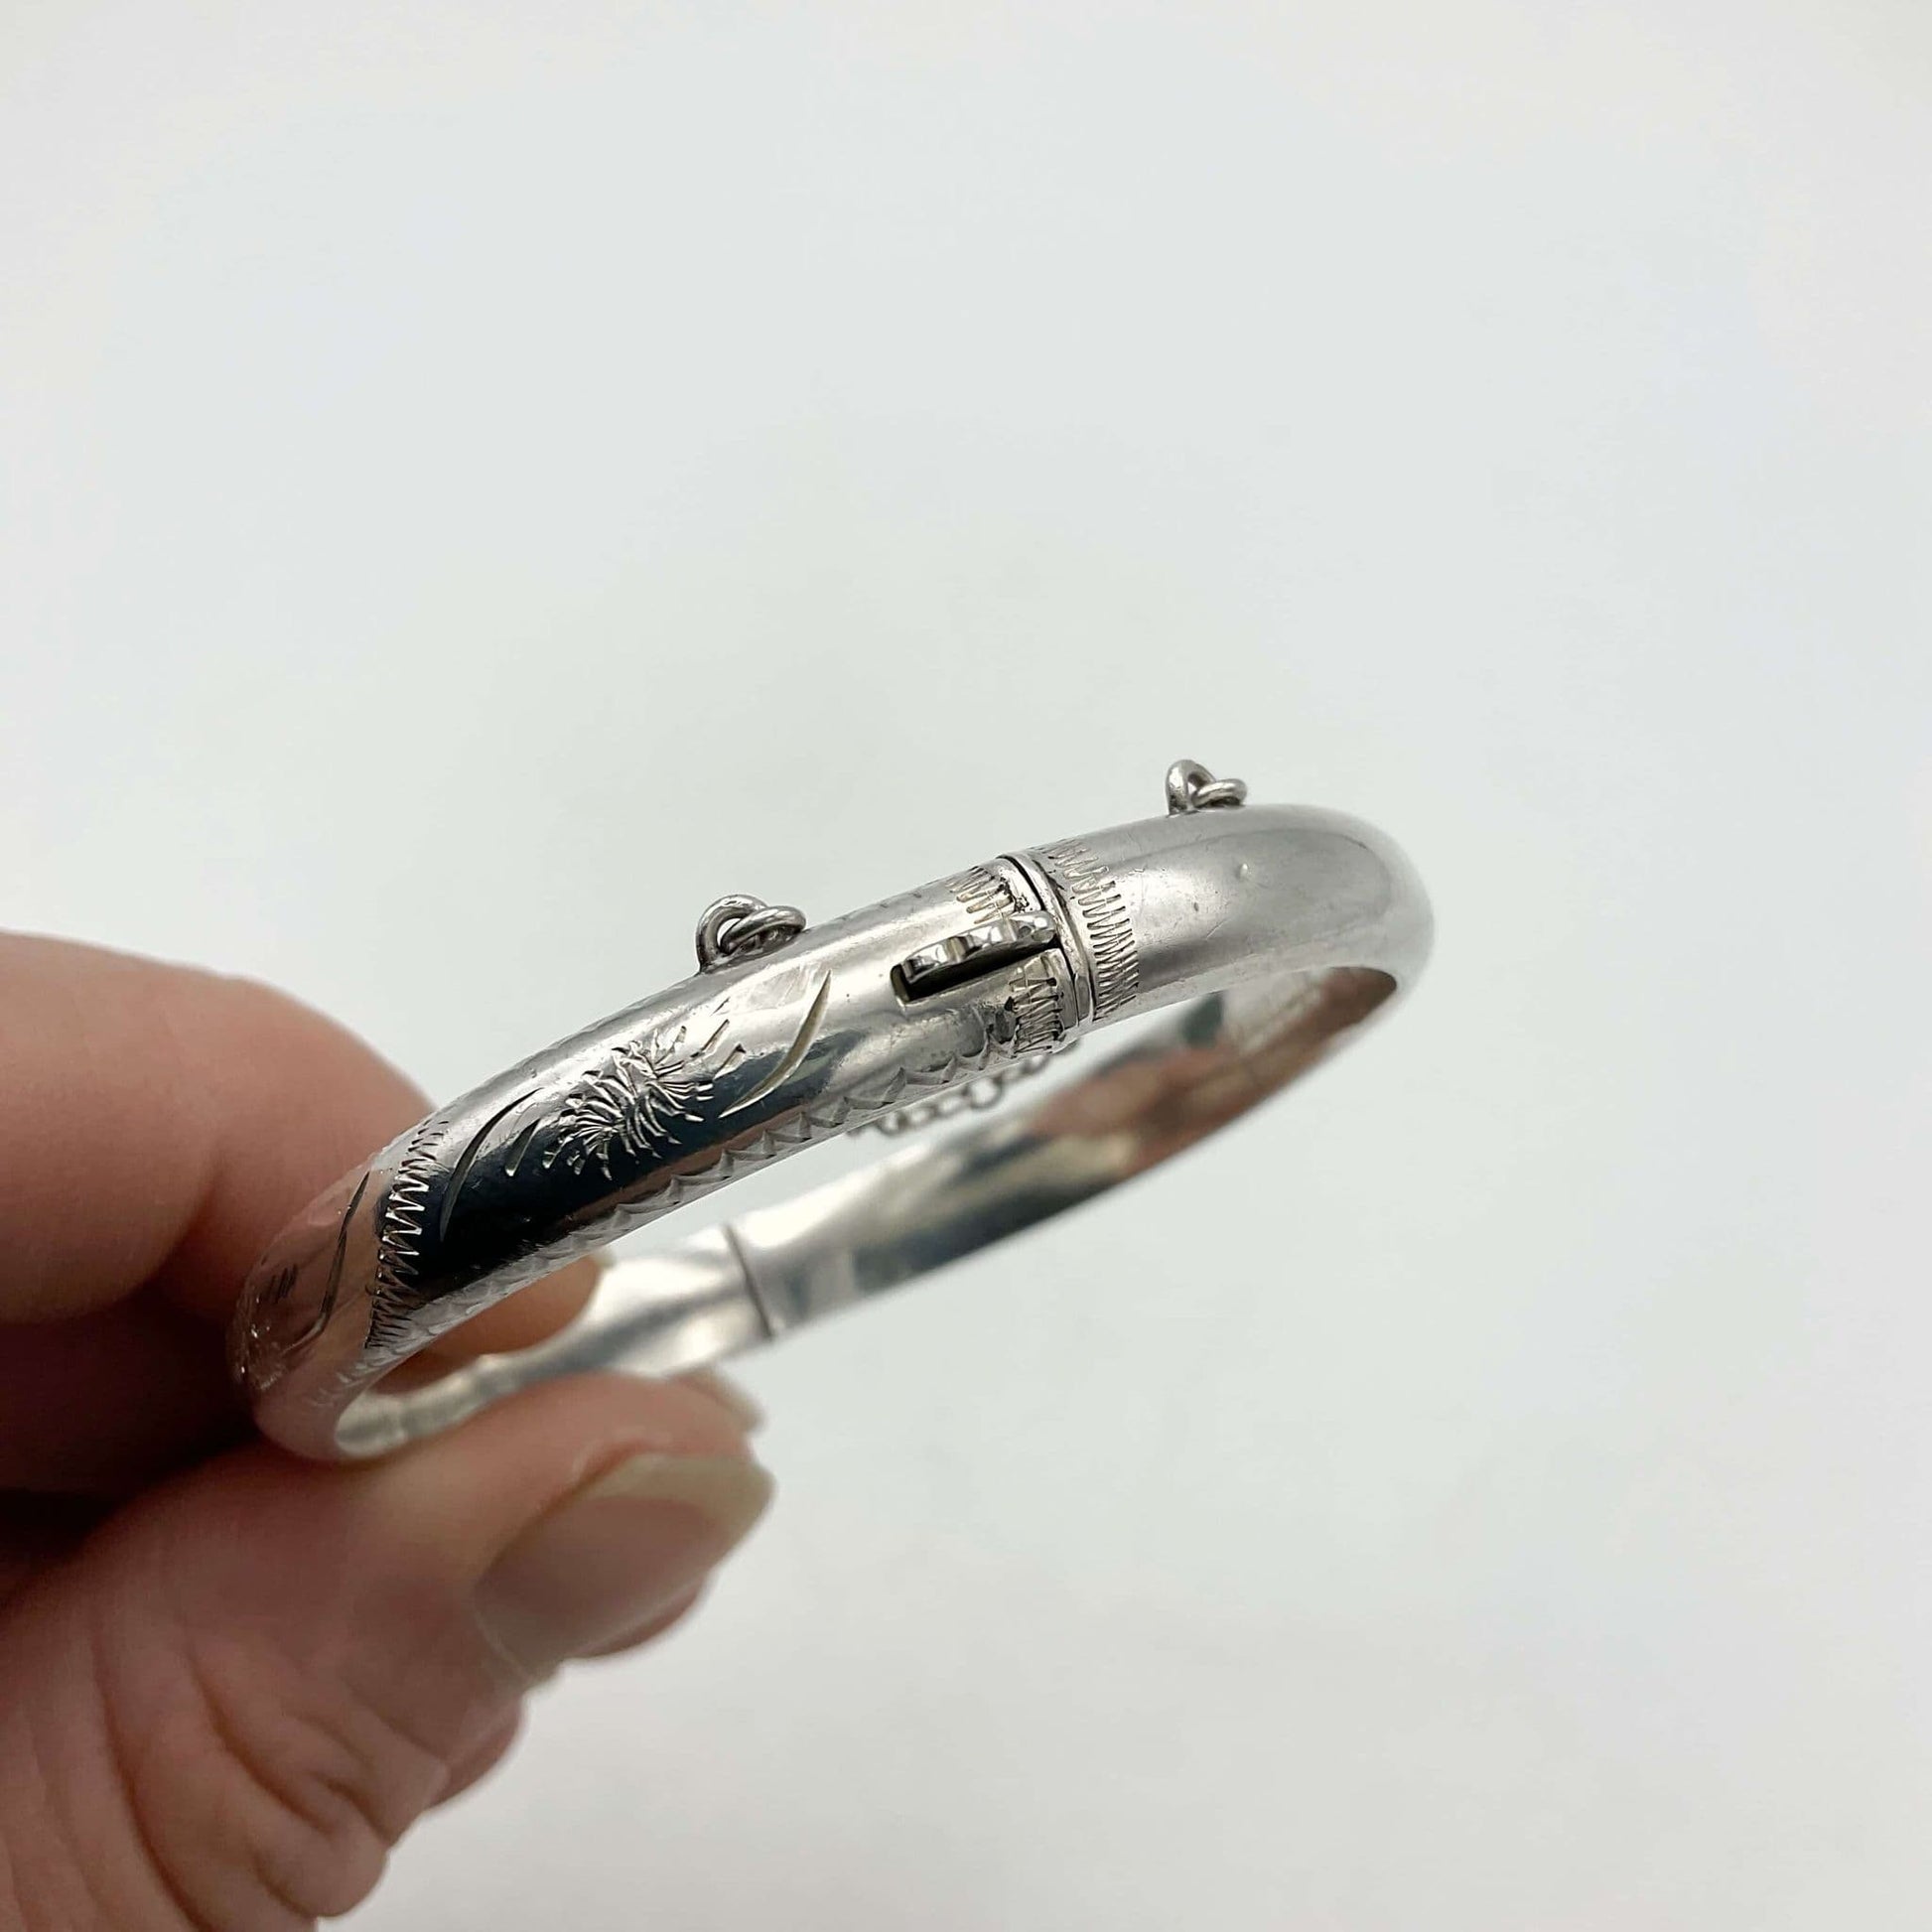 clasp on silver bracelet held in a hand